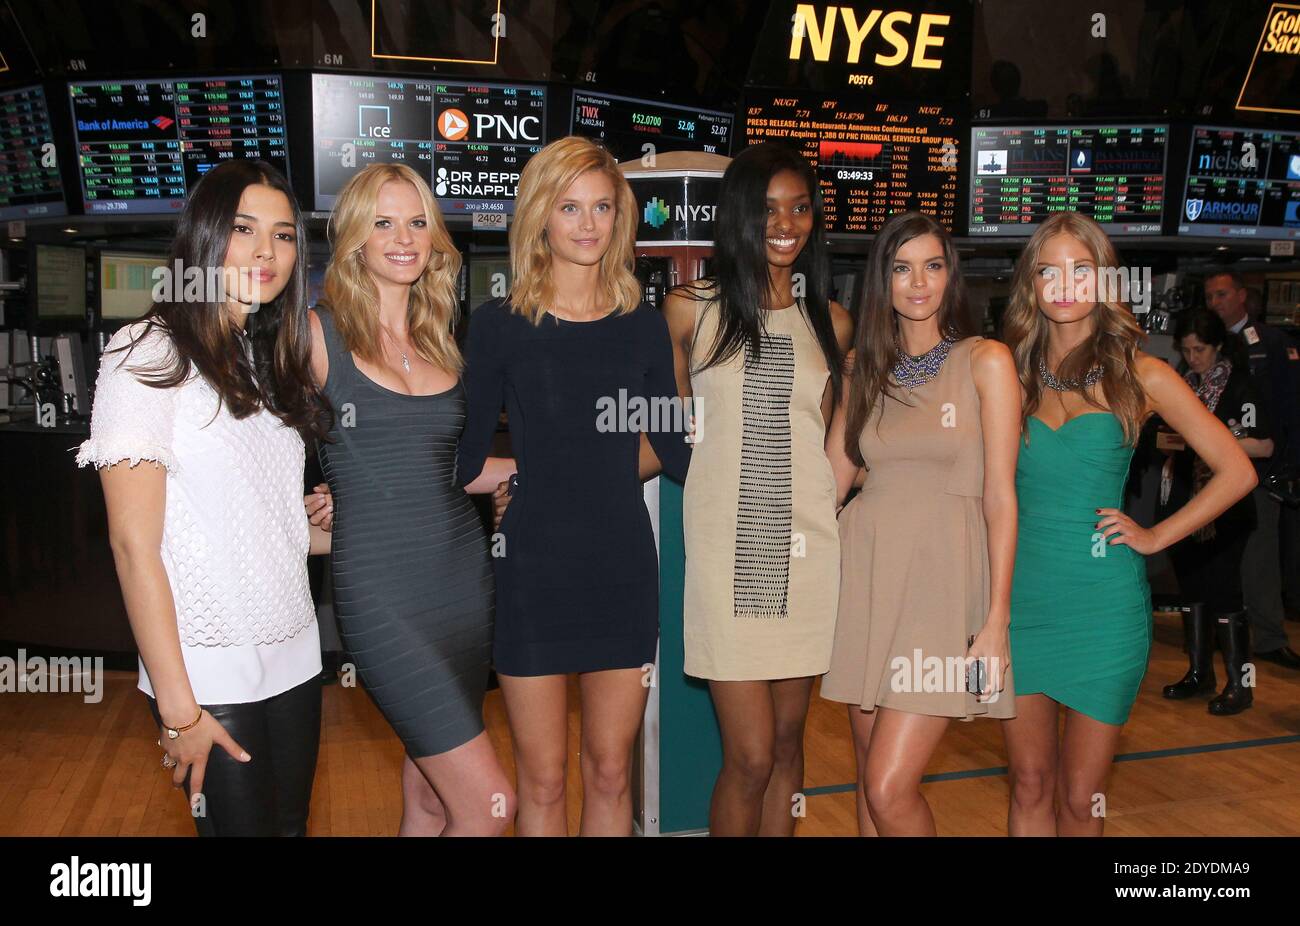 Sports Illustrated swimsuit models Jessica Gomes, Anne Vyalitsyna, Kate Bock, Adaora Cobb, Natasha Barnard and Jessica Perez ring the closing bell at the New York Stock Exchange on Wall Street in New York City, NY, USA on February 11, 2013. Photo by Charles Guerin/ABACAPRESS.COM Stock Photo